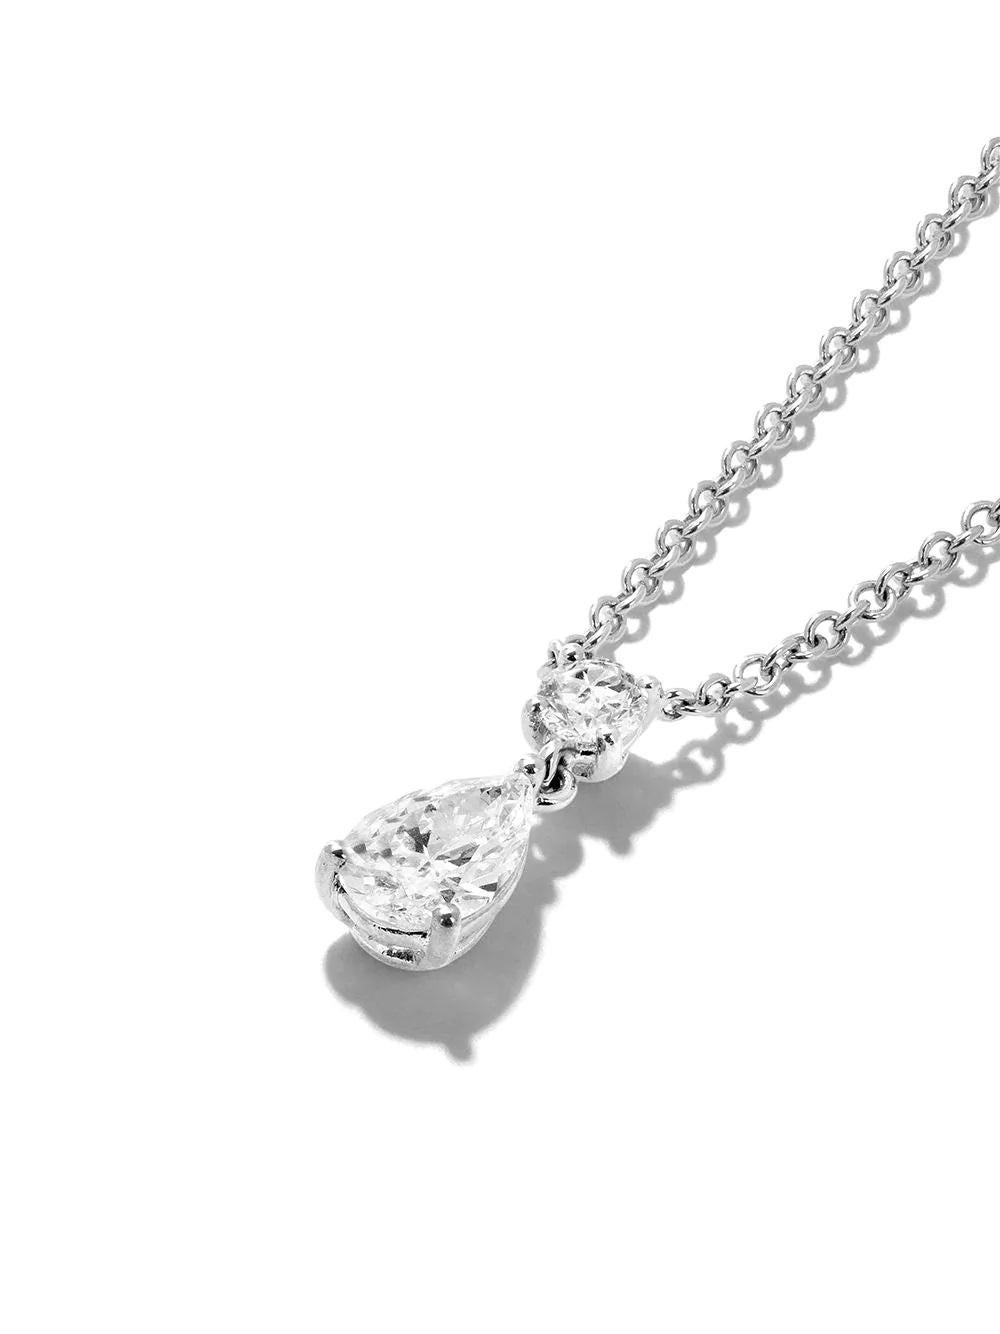 AS29
18kt white gold Mye diamond pendant necklace

This diamond necklace from AS29's Mye collection is a beautiful classic. Crafted in 18kt white gold, this chain necklace is decorated with a sparkling round cut diamond and an oval cut diamond. Let